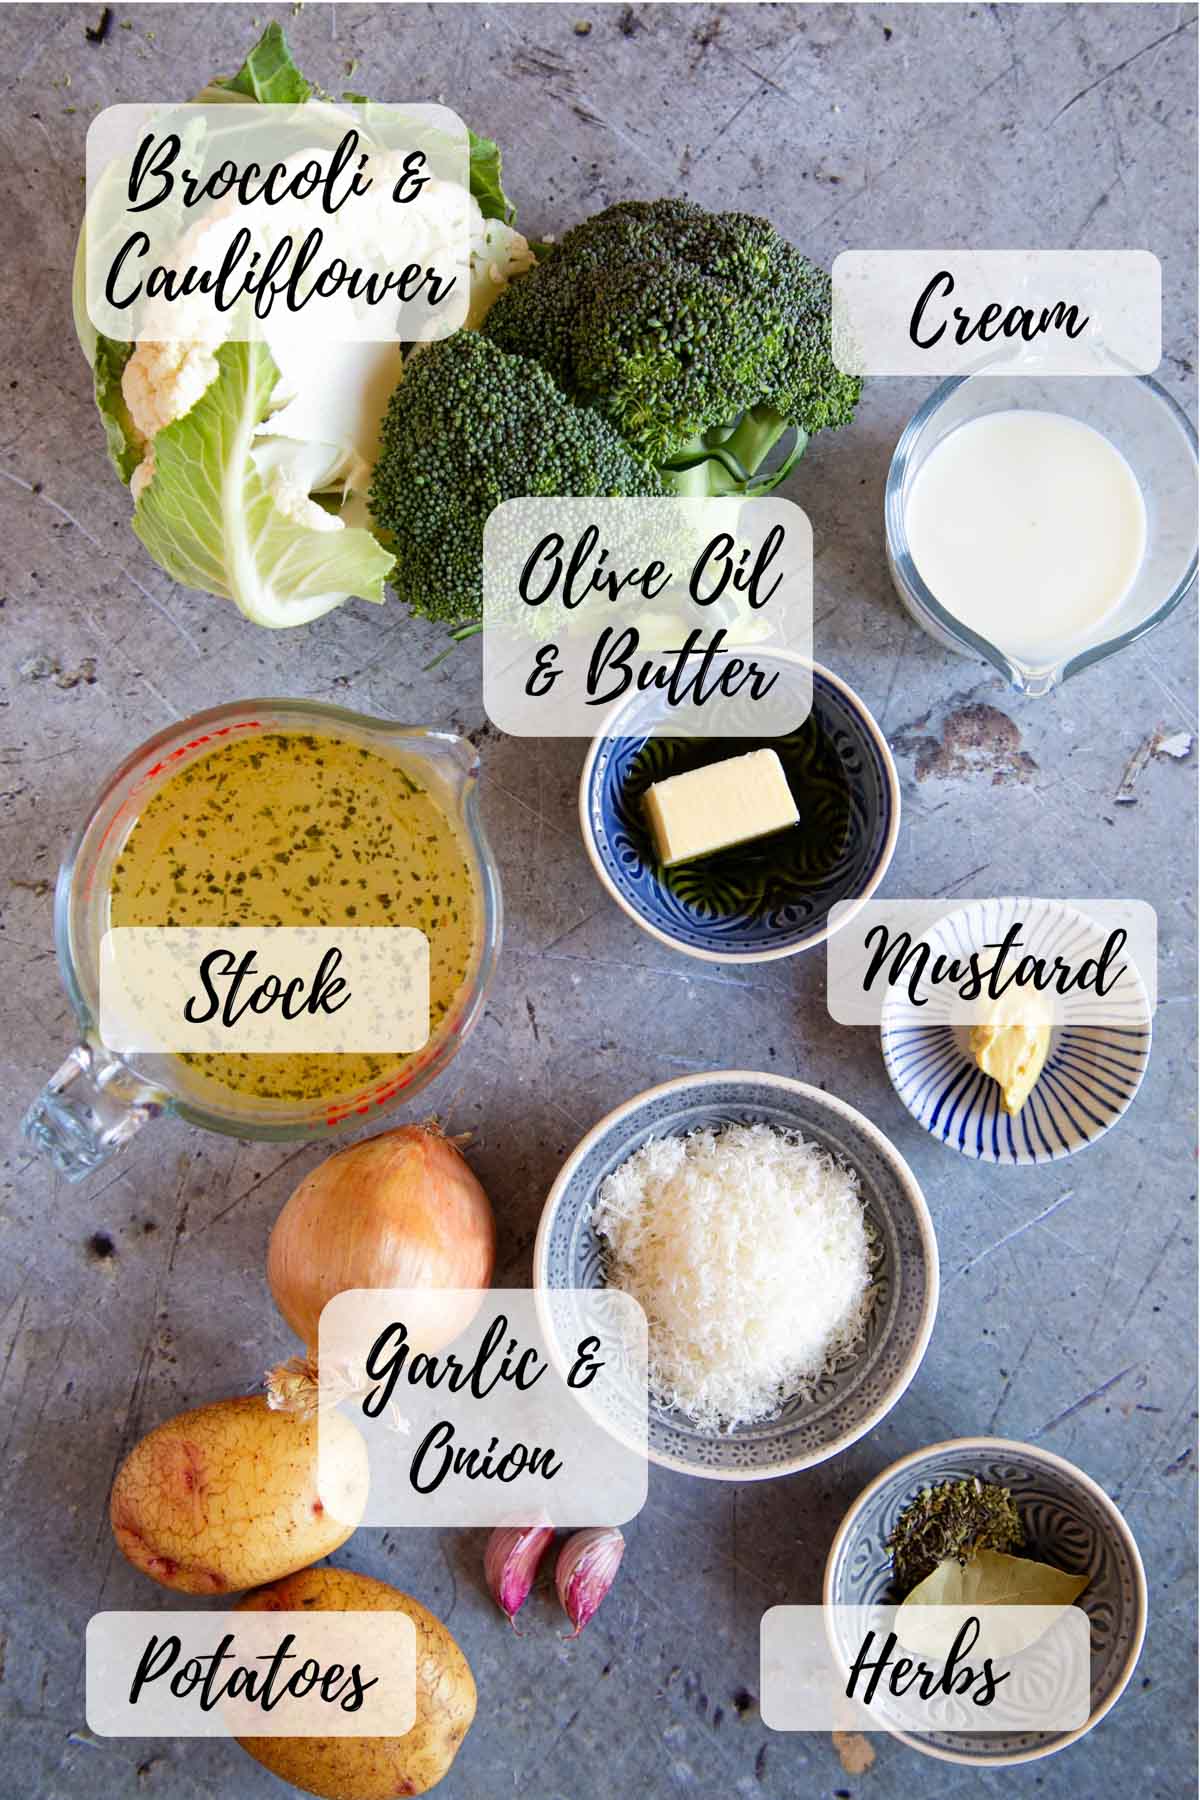 The ingredients, ready to cook: Cauliflower, broccoli, cream or milk, olive oil and butter, mustard, cheese, dried herbs, garlic, onion, potato, and stock. 